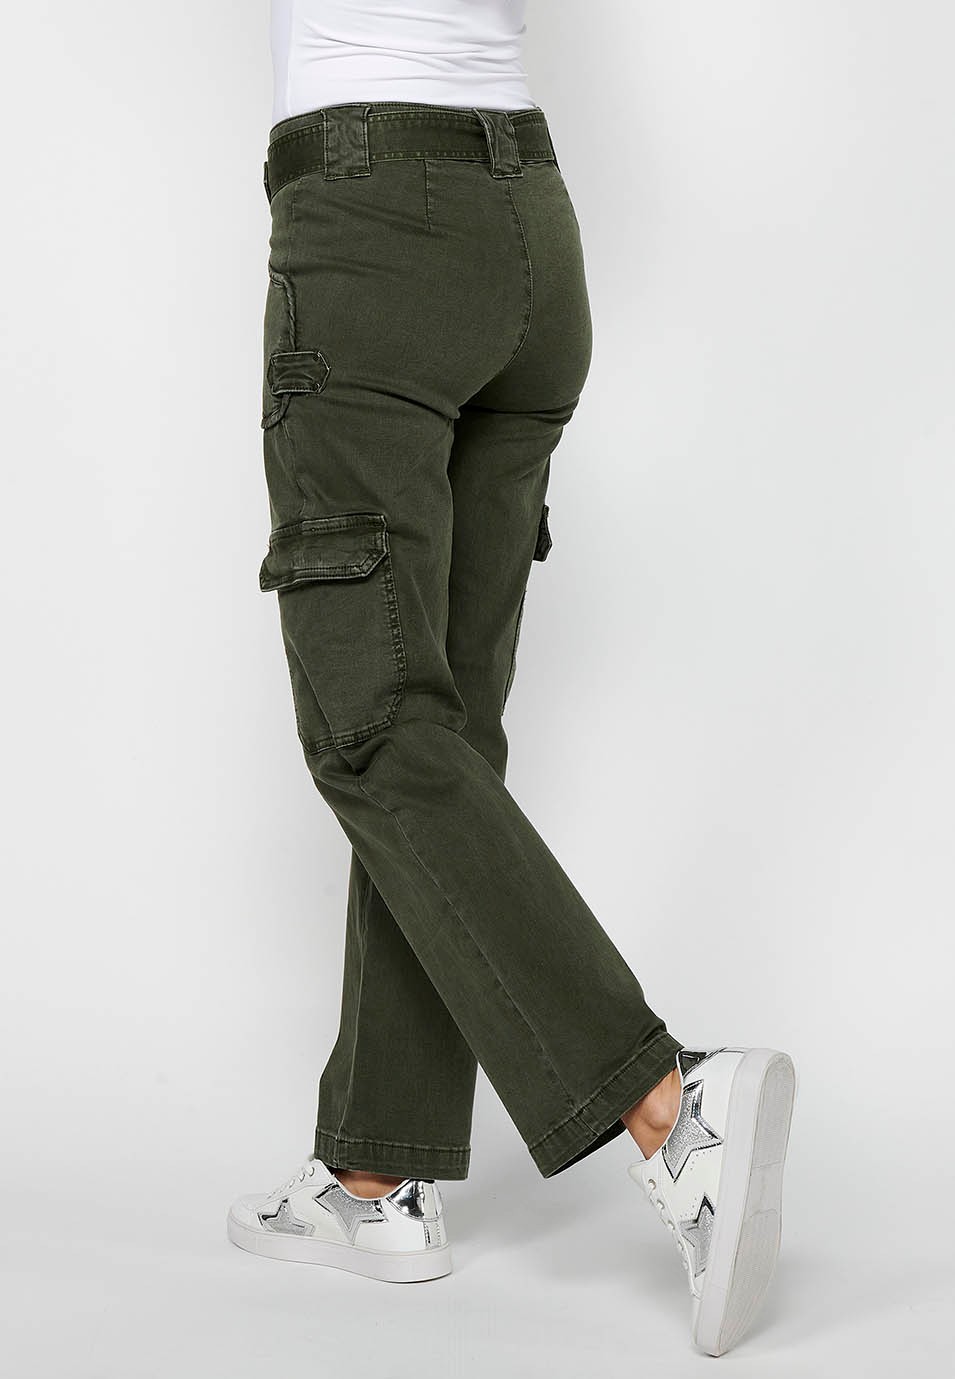 Long straight-cut pants with front zipper closure and button with patch pockets in Khaki Color for Women 7